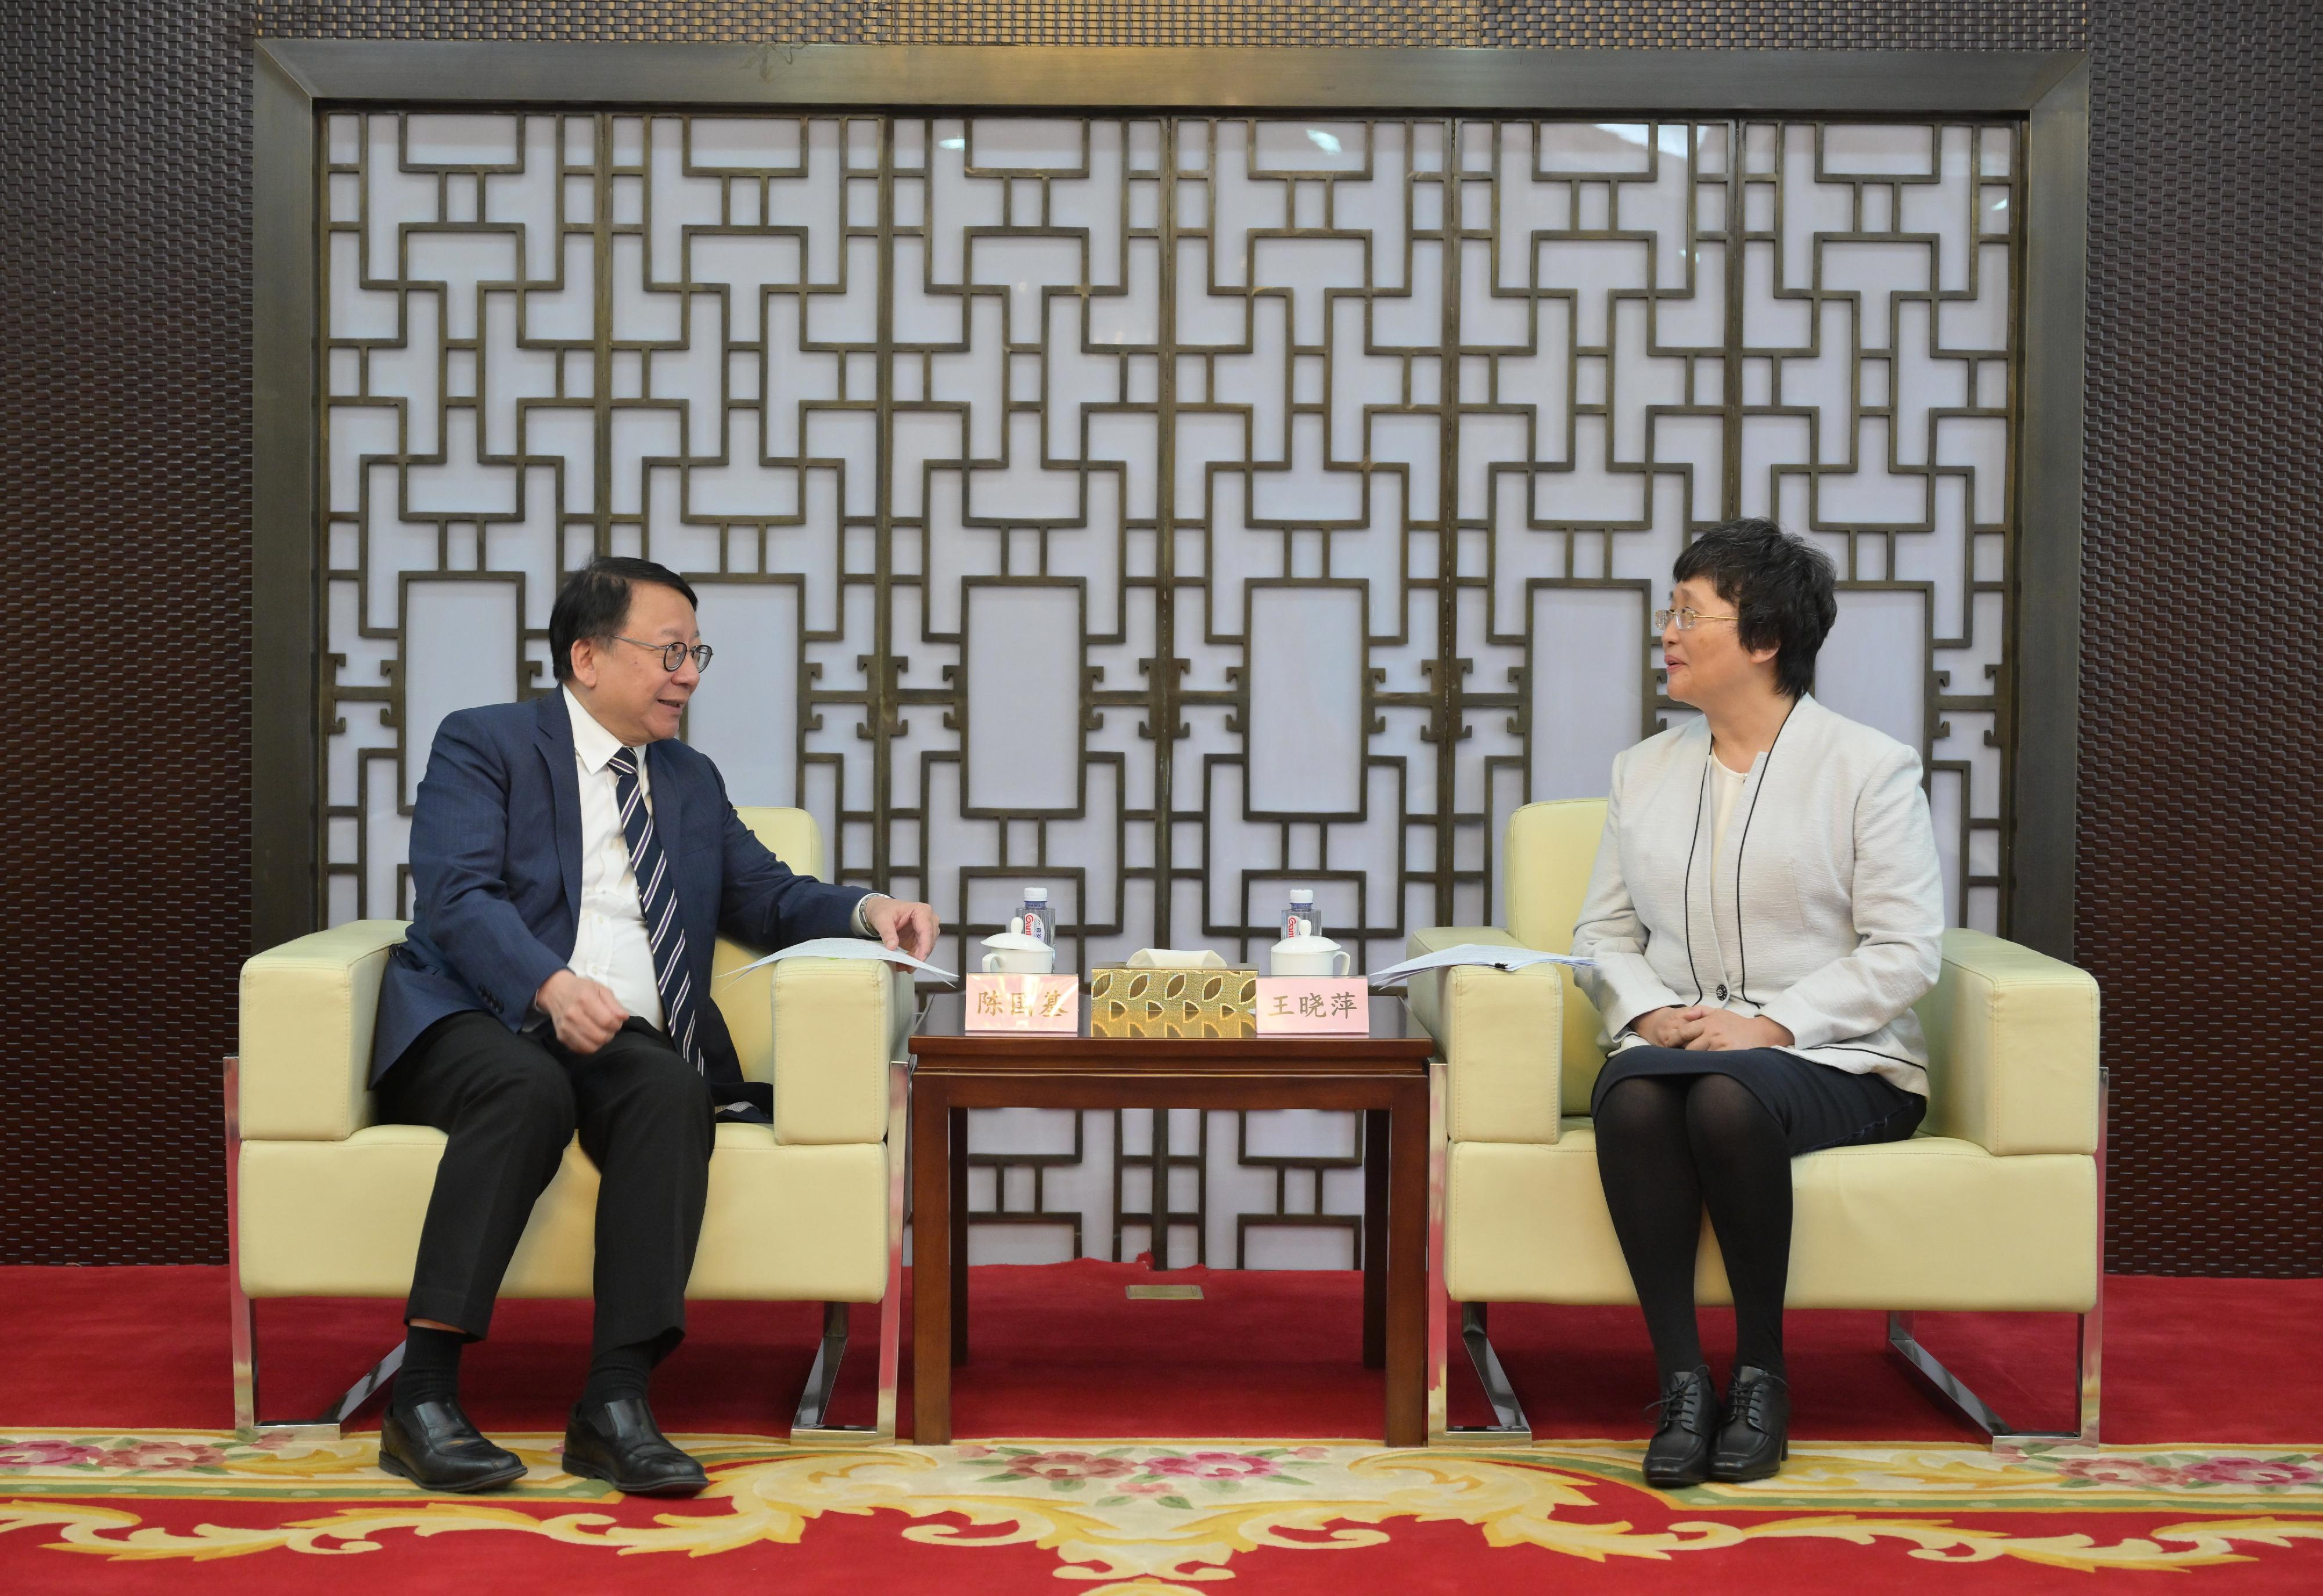 The Chief Secretary for Administration, Mr Chan Kwok-ki (left), meets with the Minister of Human Resources and Social Security, Ms Wang Xiaoping (right), in Beijing today (April 27).